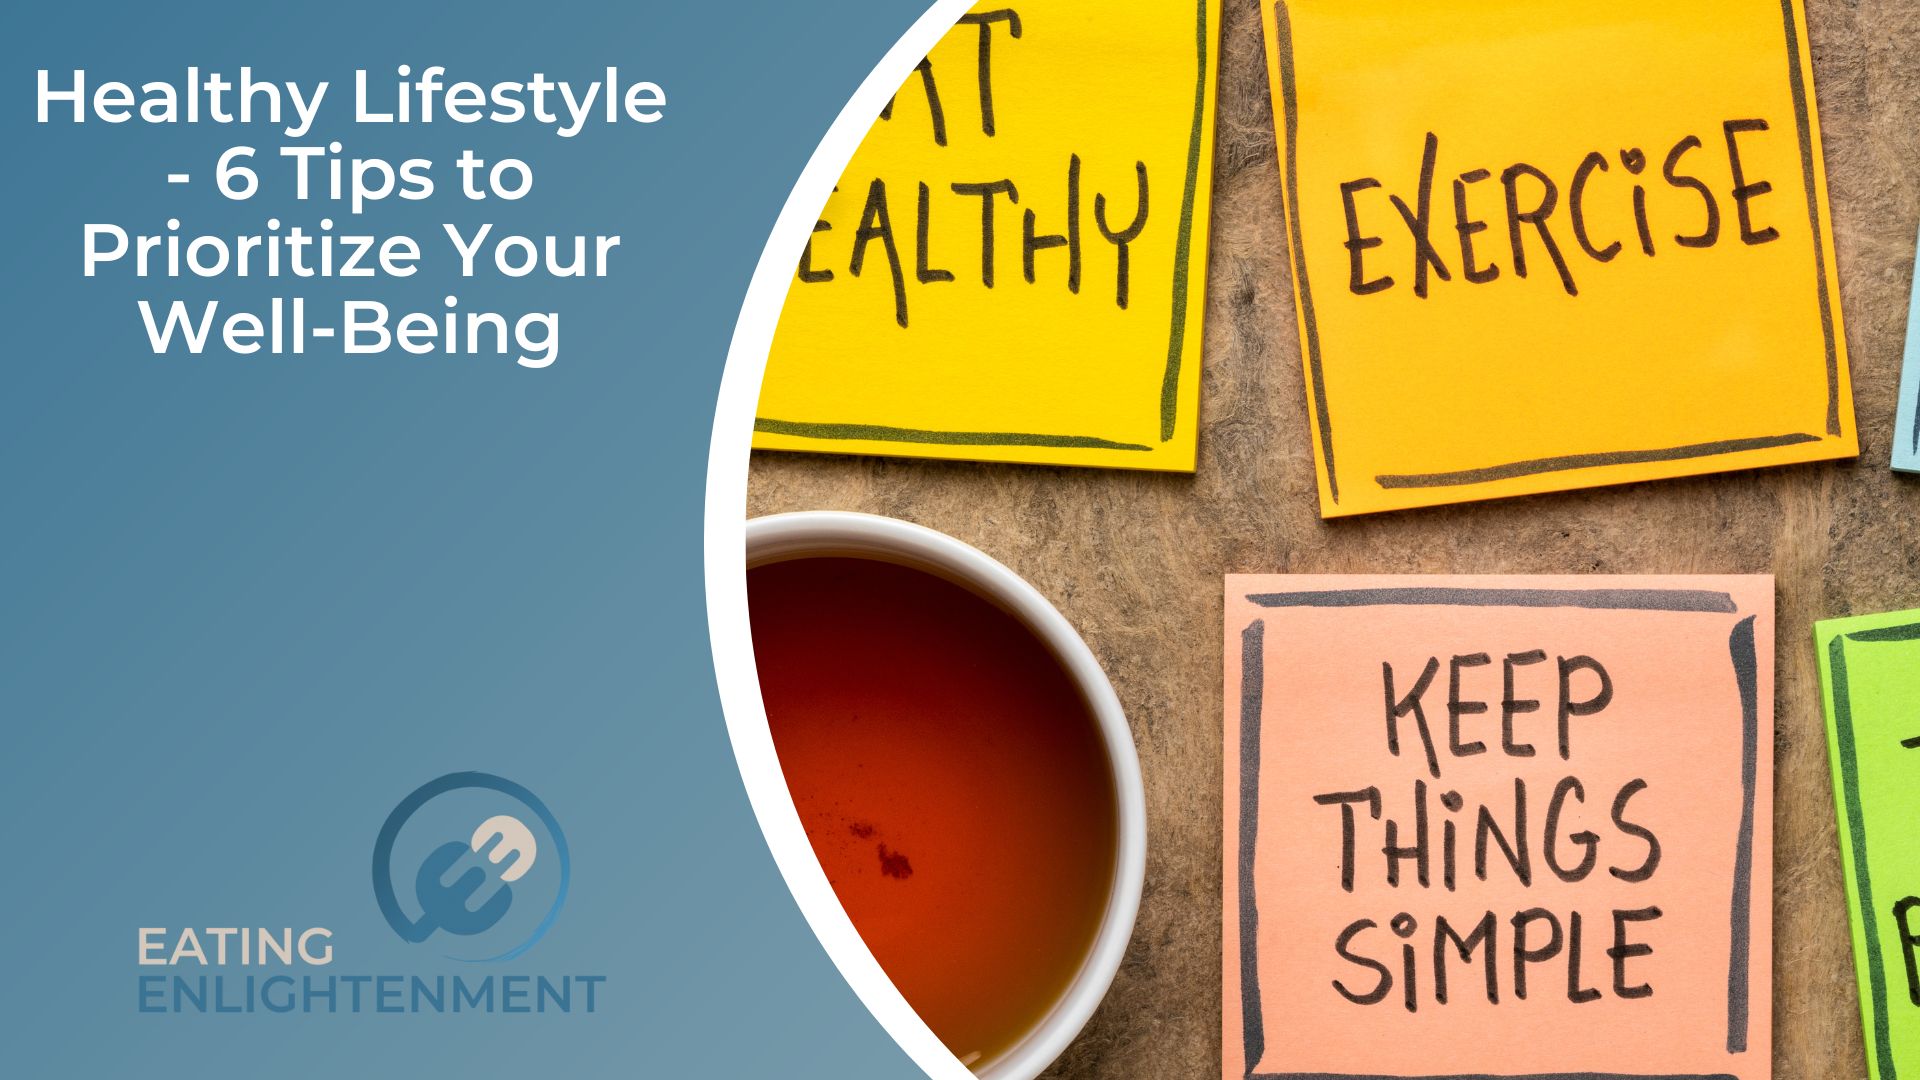 Healthy Lifestyle - 6 Tips to Prioritize Your Well-Being